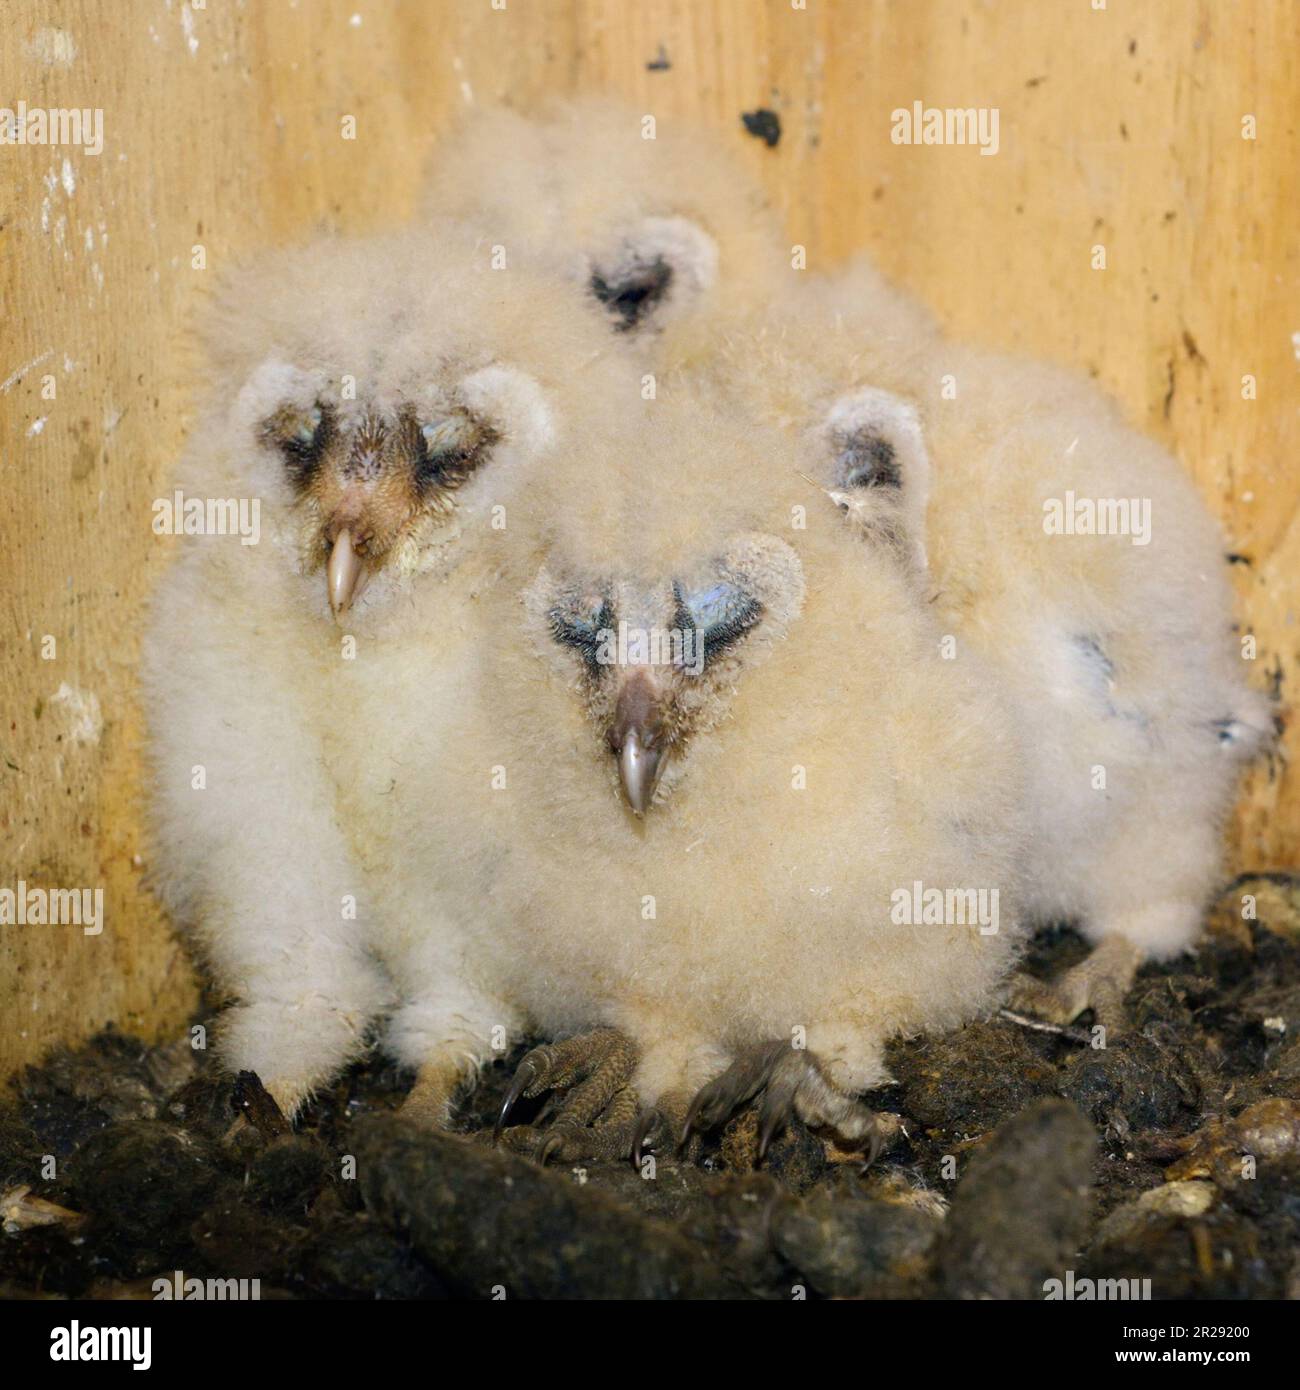 Barn Owl / Schleiereule ( Tyto alba ), chicks, offspring, crouched, sitting in their nesting aid, sleeping, cute and funny animal babies, wildlife, Eu Stock Photo